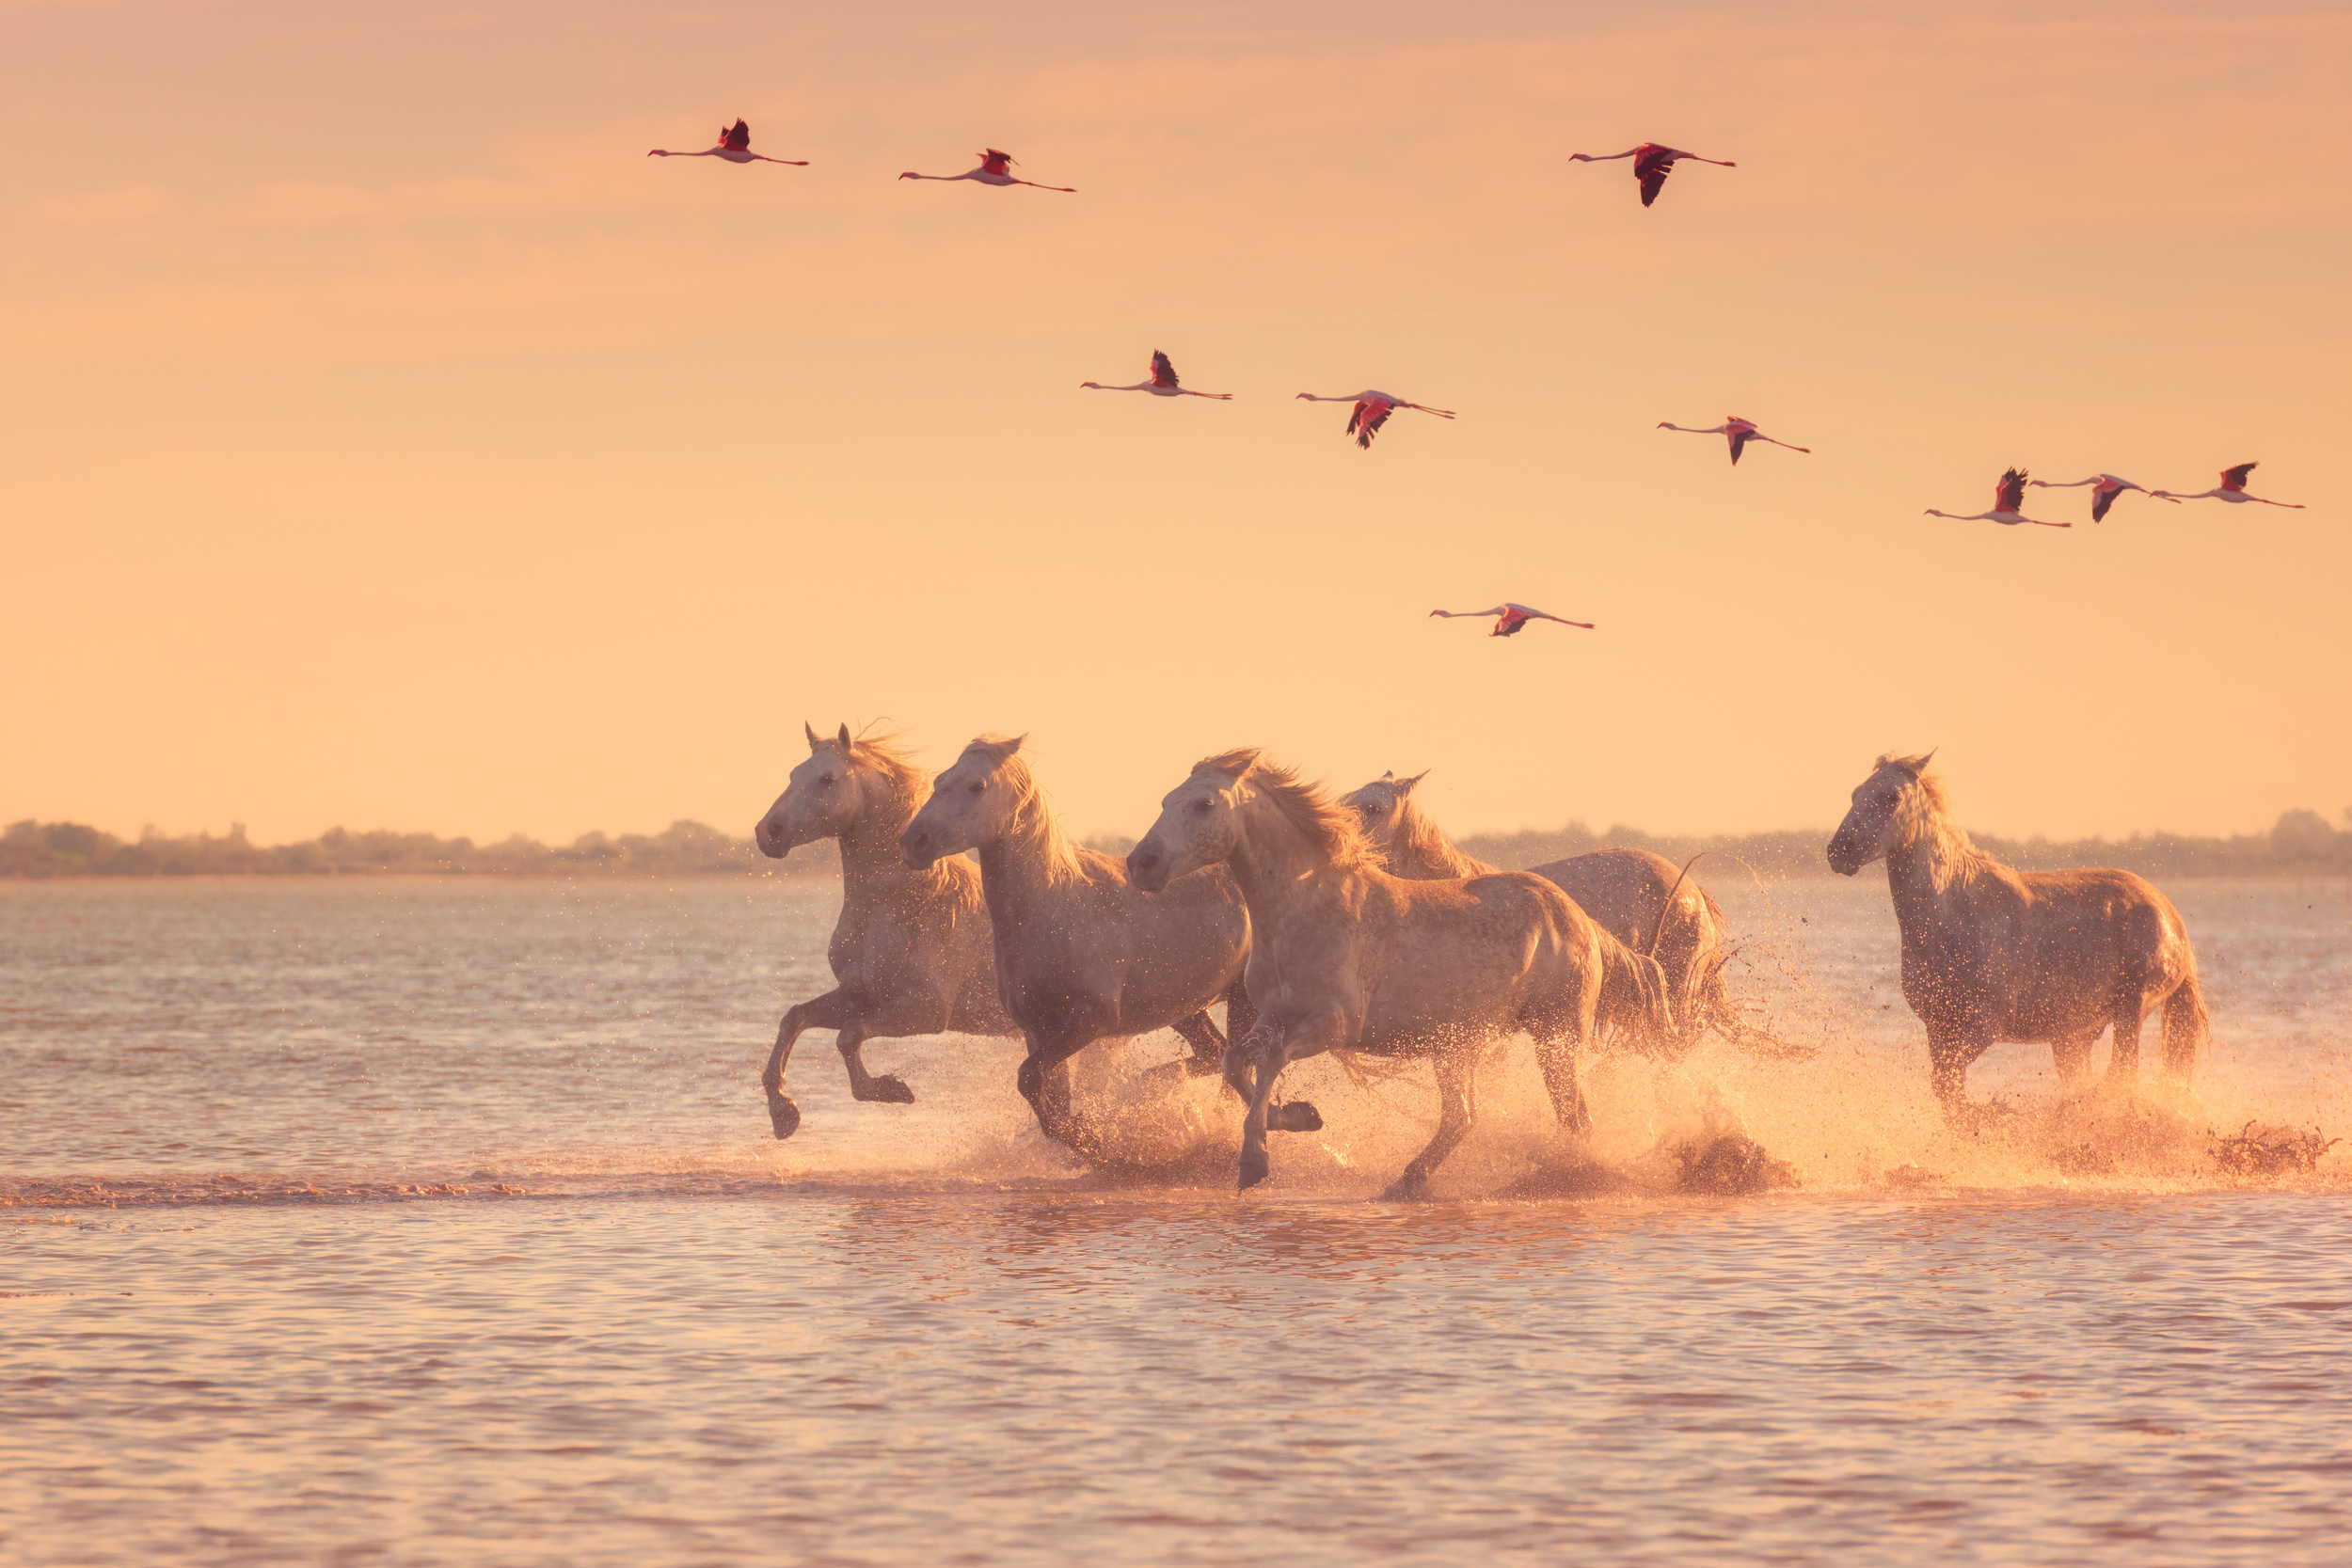 <p>Just south of Arles, in the wetlands that spill out into the Mediterranean, is a biodiverse park that is a must-visit. Additionally, the Camargue Horse of the same name can be found running wild within the park.</p><p><a href='https://www.msn.com/en-us/community/channel/vid-cj9pqbr0vn9in2b6ddcd8sfgpfq6x6utp44fssrv6mc2gtybw0us'>Did you enjoy this slideshow? Follow us on MSN to see more of our exclusive lifestyle content.</a></p>